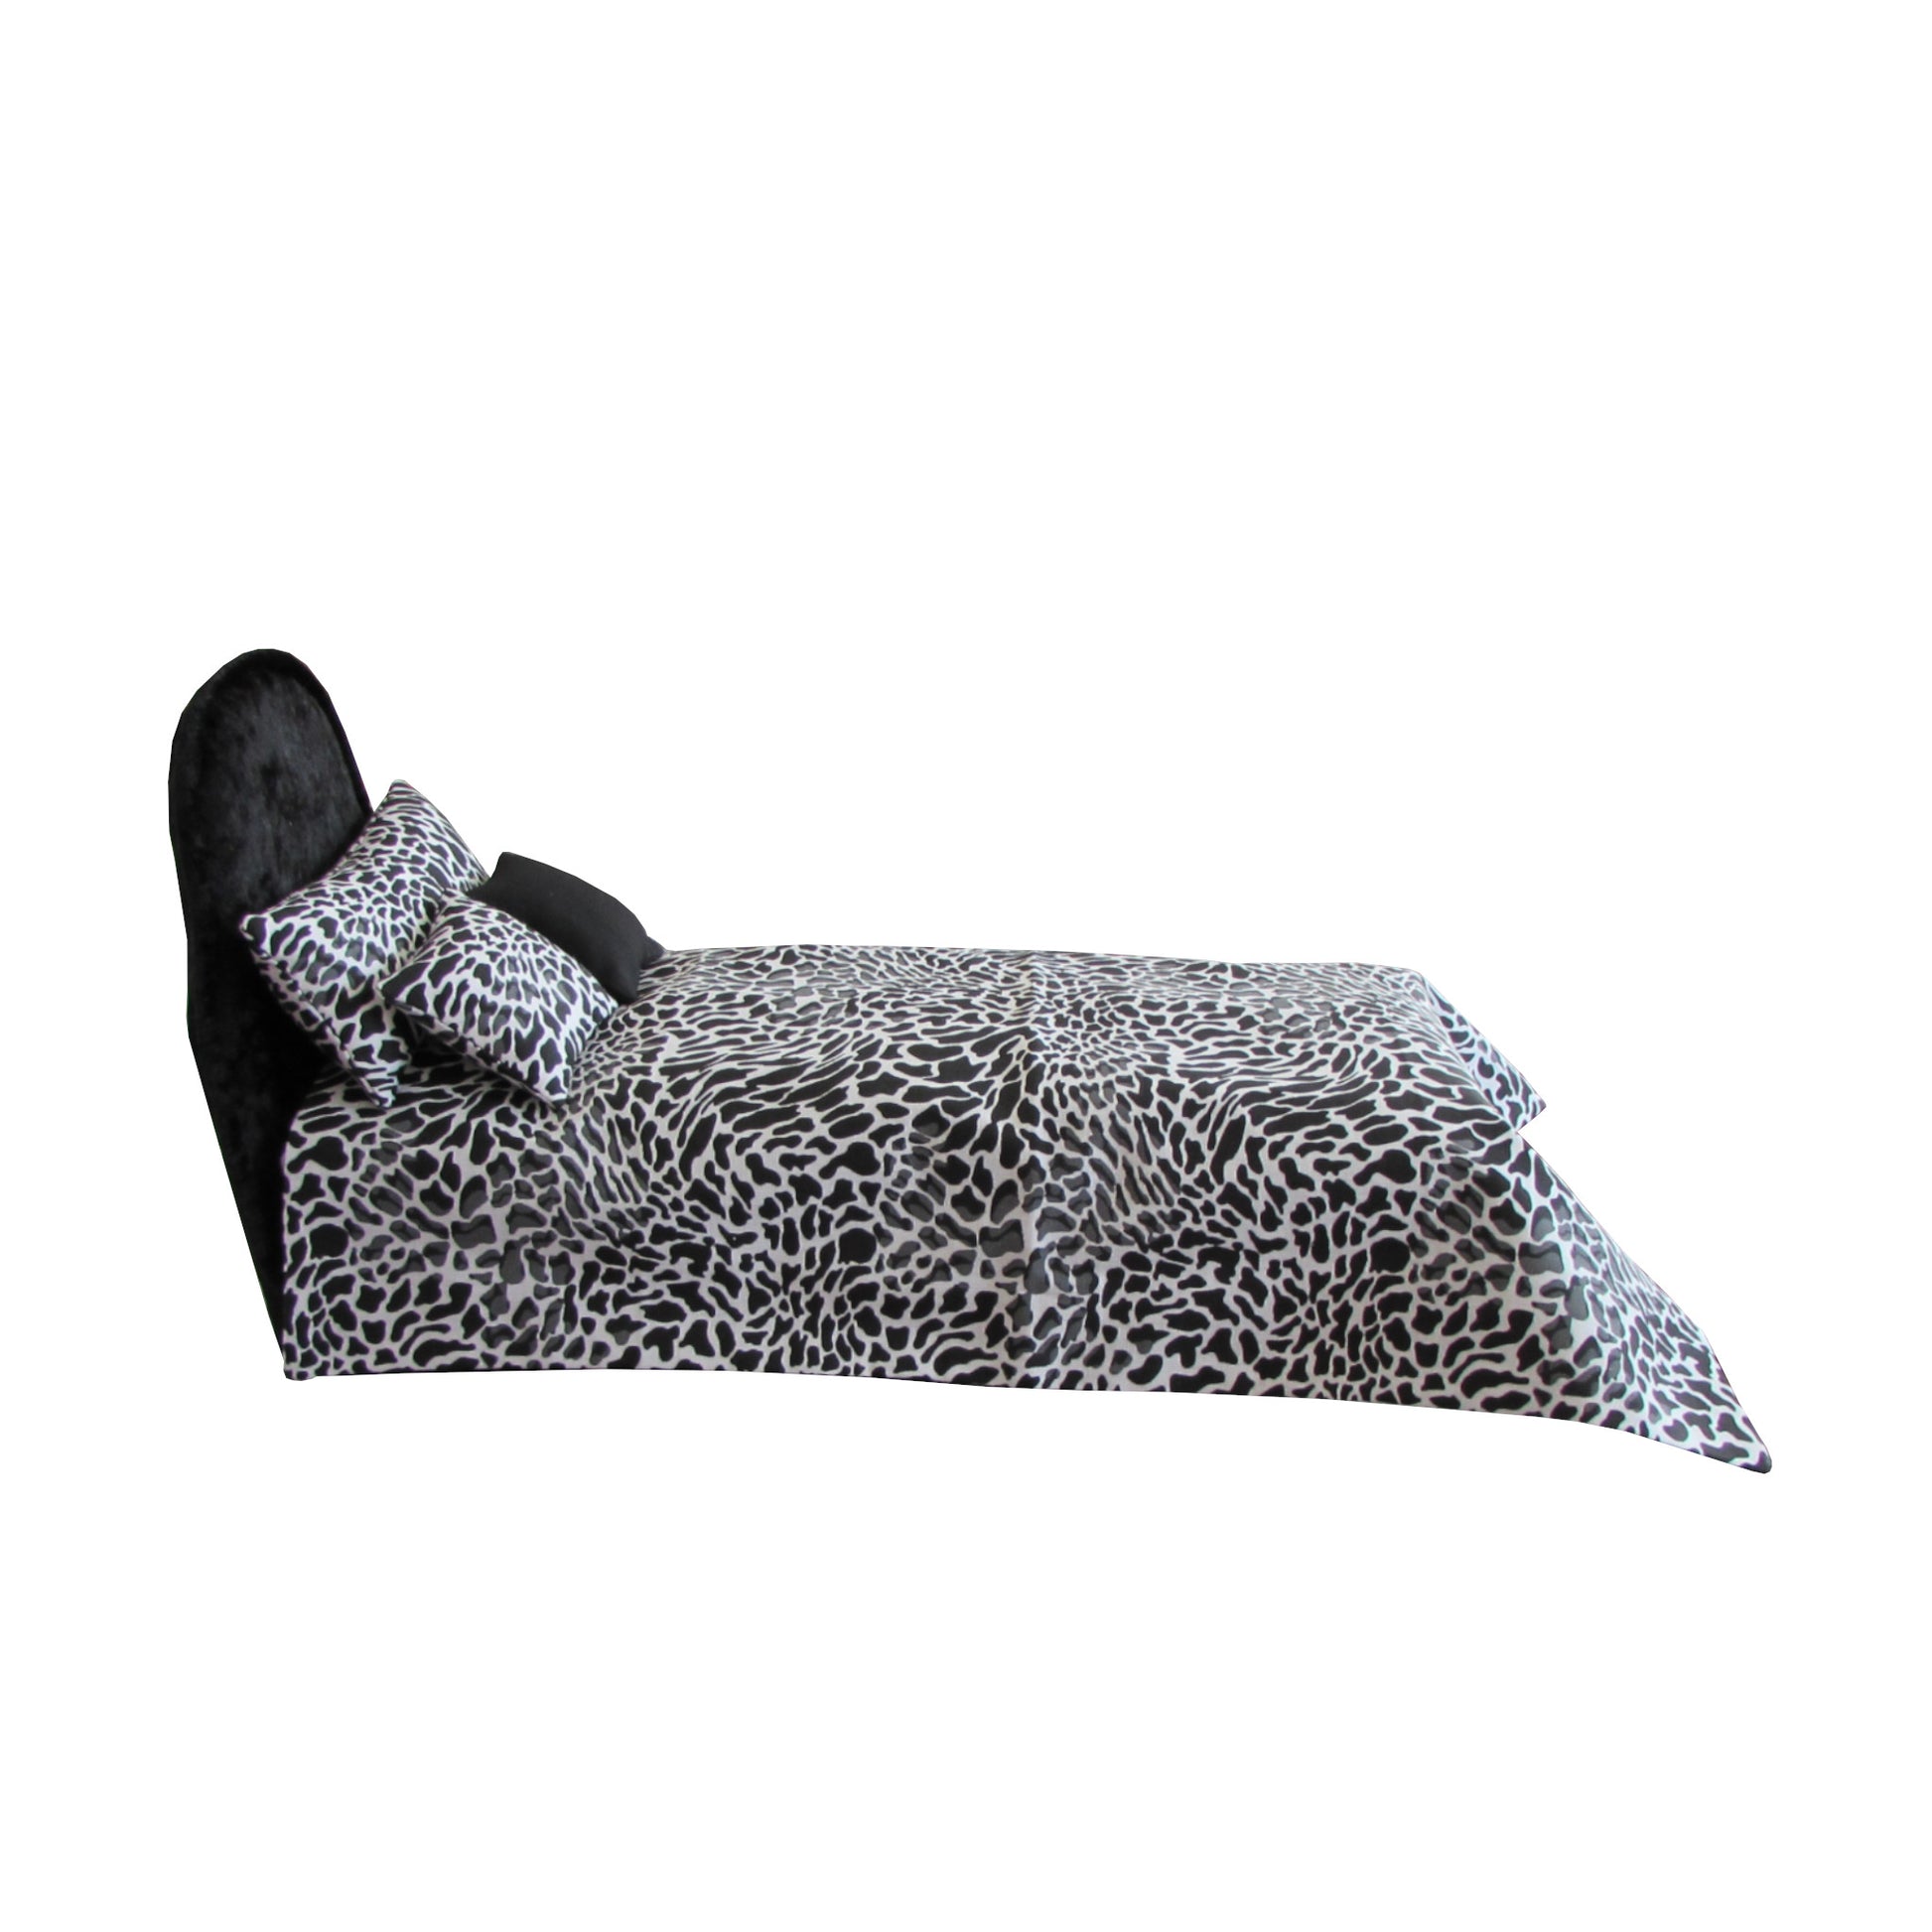 Black, White, and Gray Animal Print Doll Bedding and Black Crushed Velvet Doll Bed for 11.5-inch and 12-inch dolls